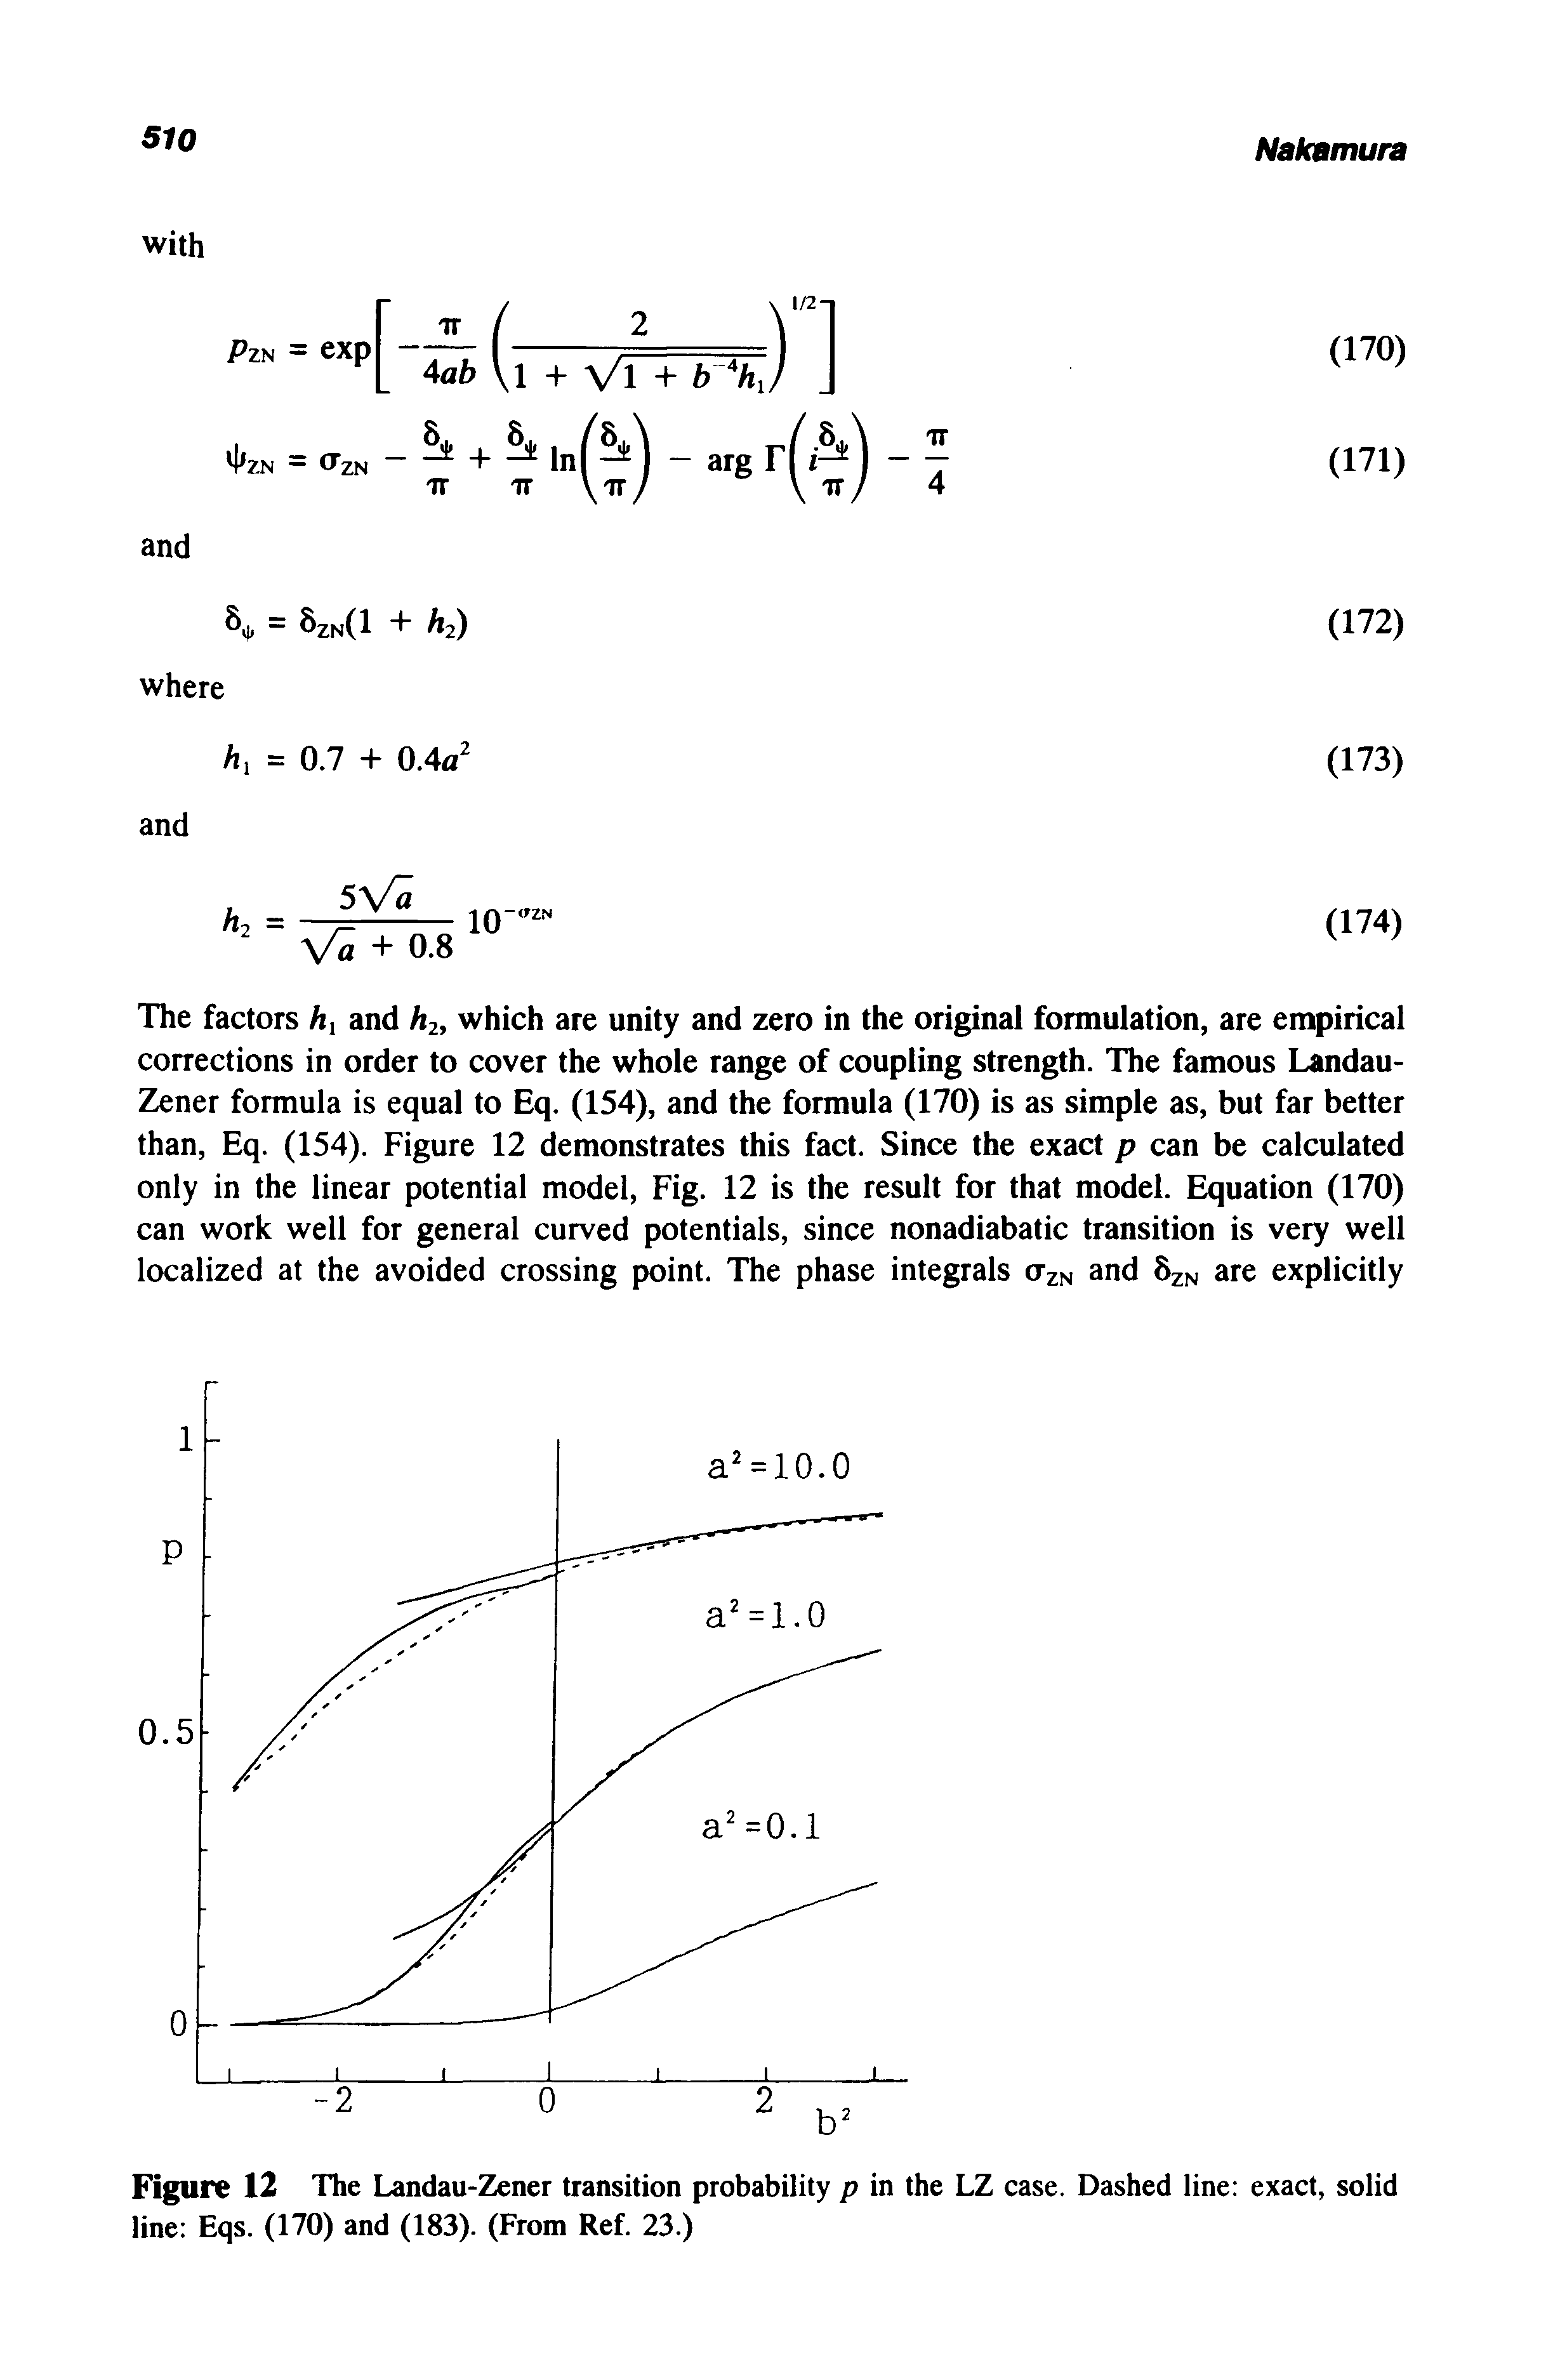 Figure 12 The Landau-Zener transition probability p in the LZ case. Dashed line exact, solid line Eqs. (170) and (183). (From Ref. 23.)...